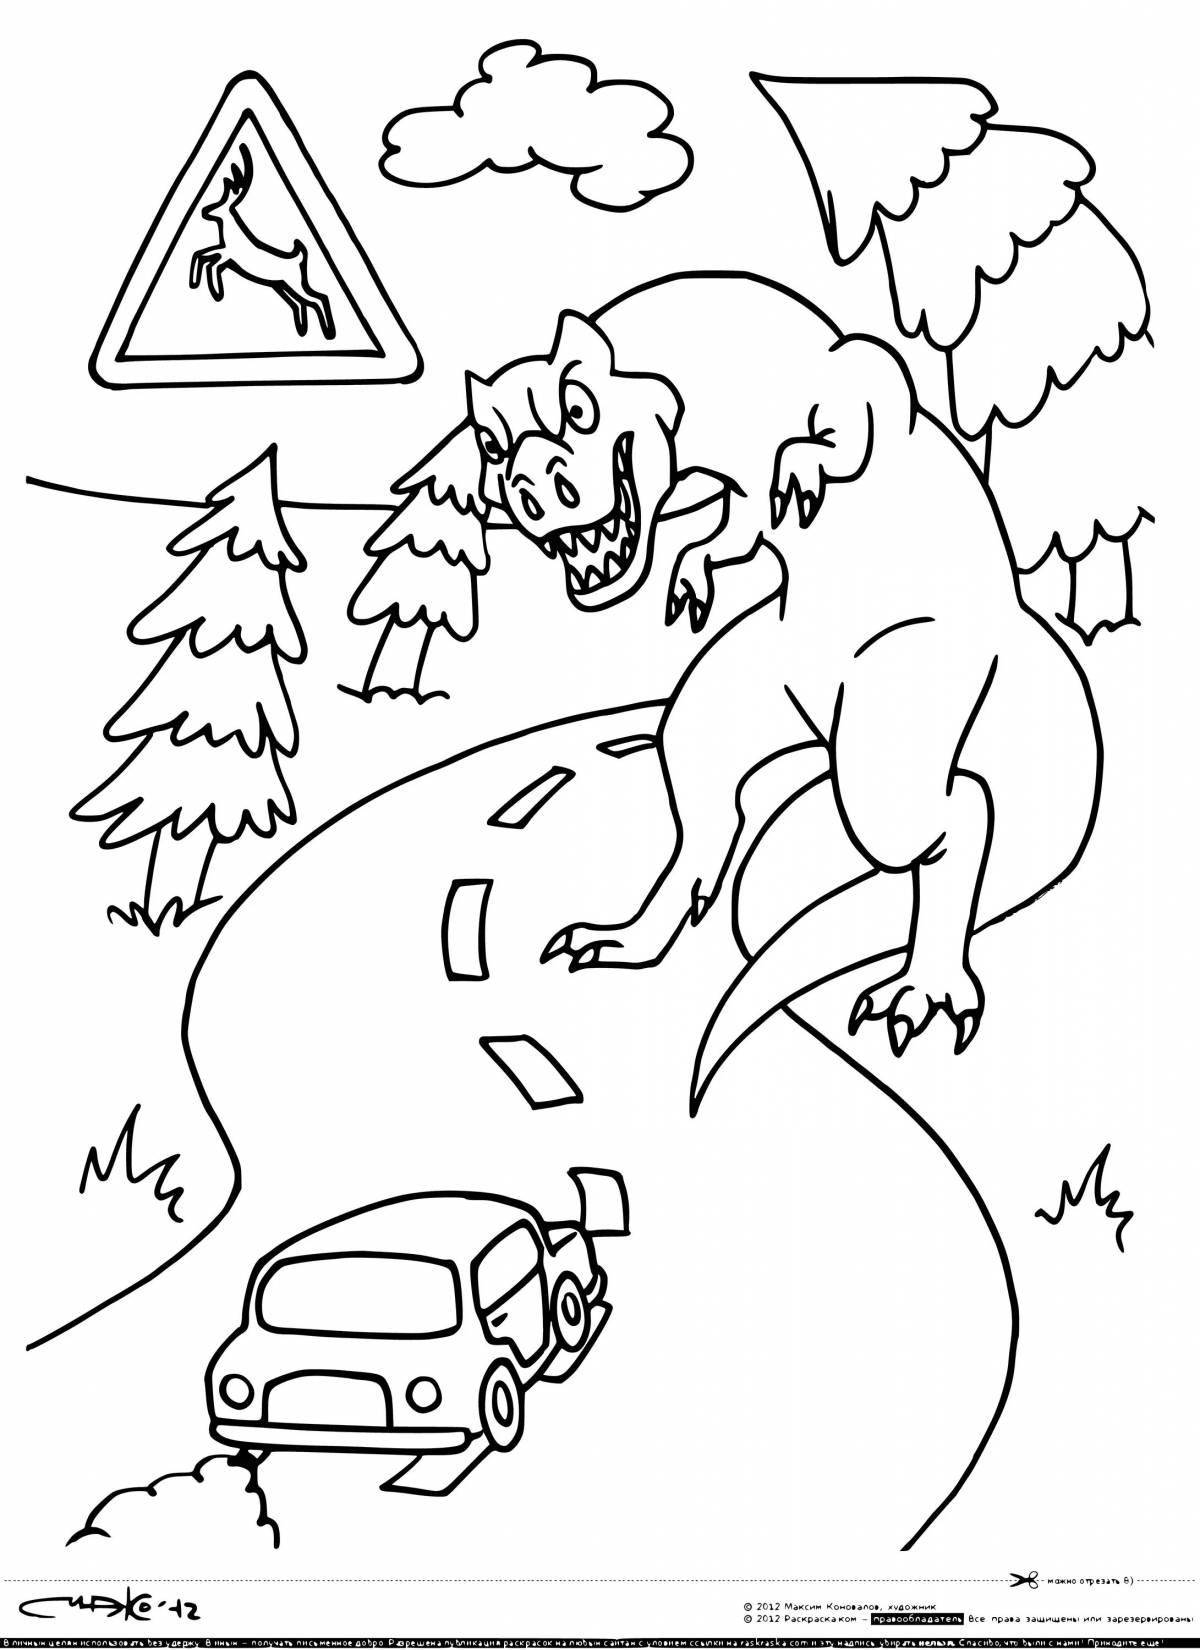 Entertaining coloring book traffic rules in winter for children